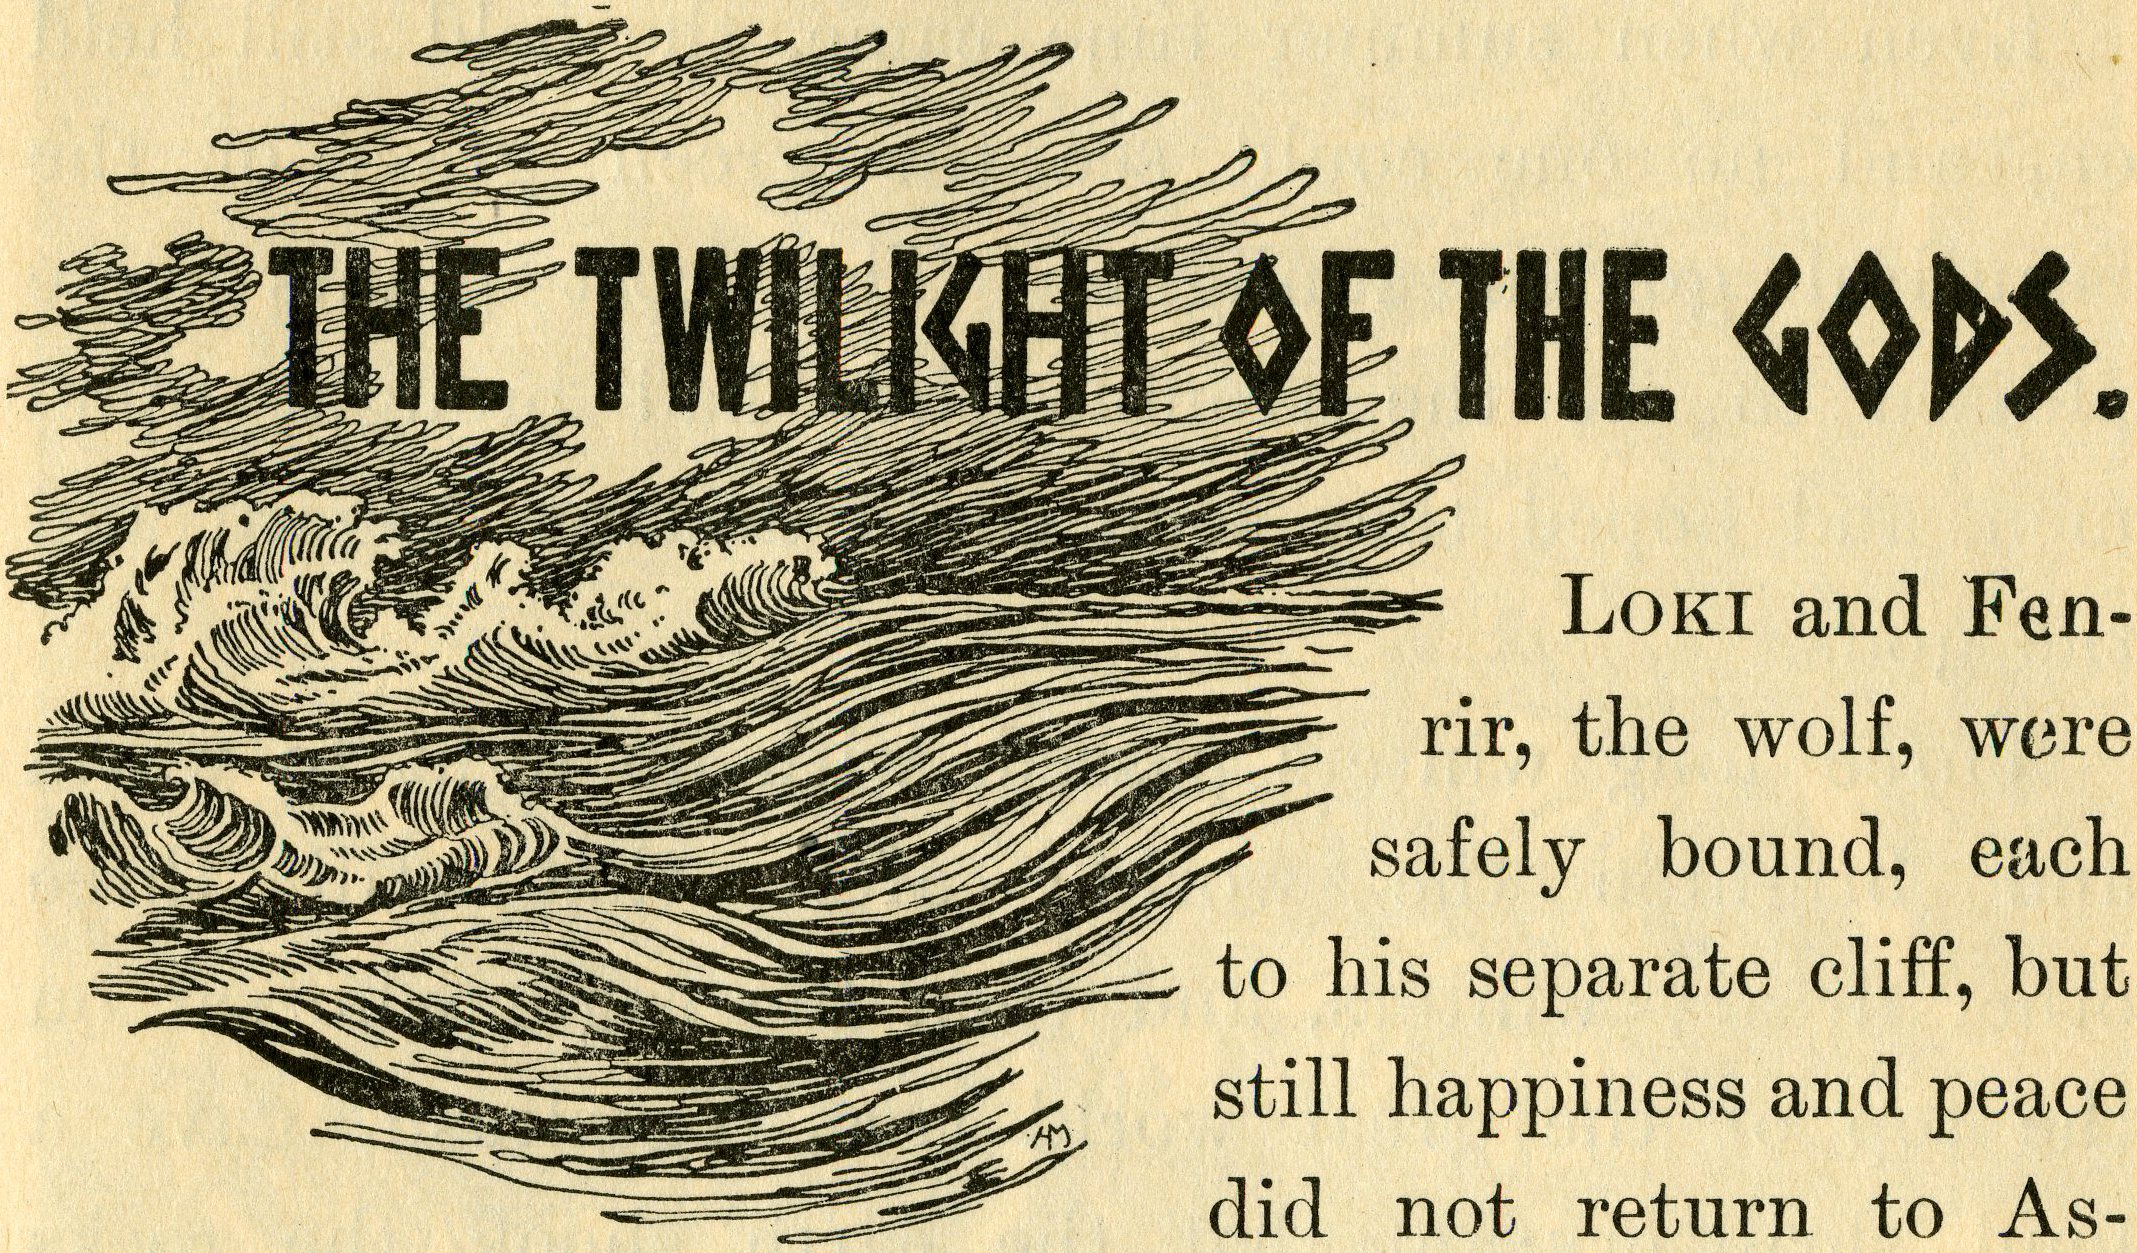 Illustrated Title Header for "The Twilight of the
                                Gods"